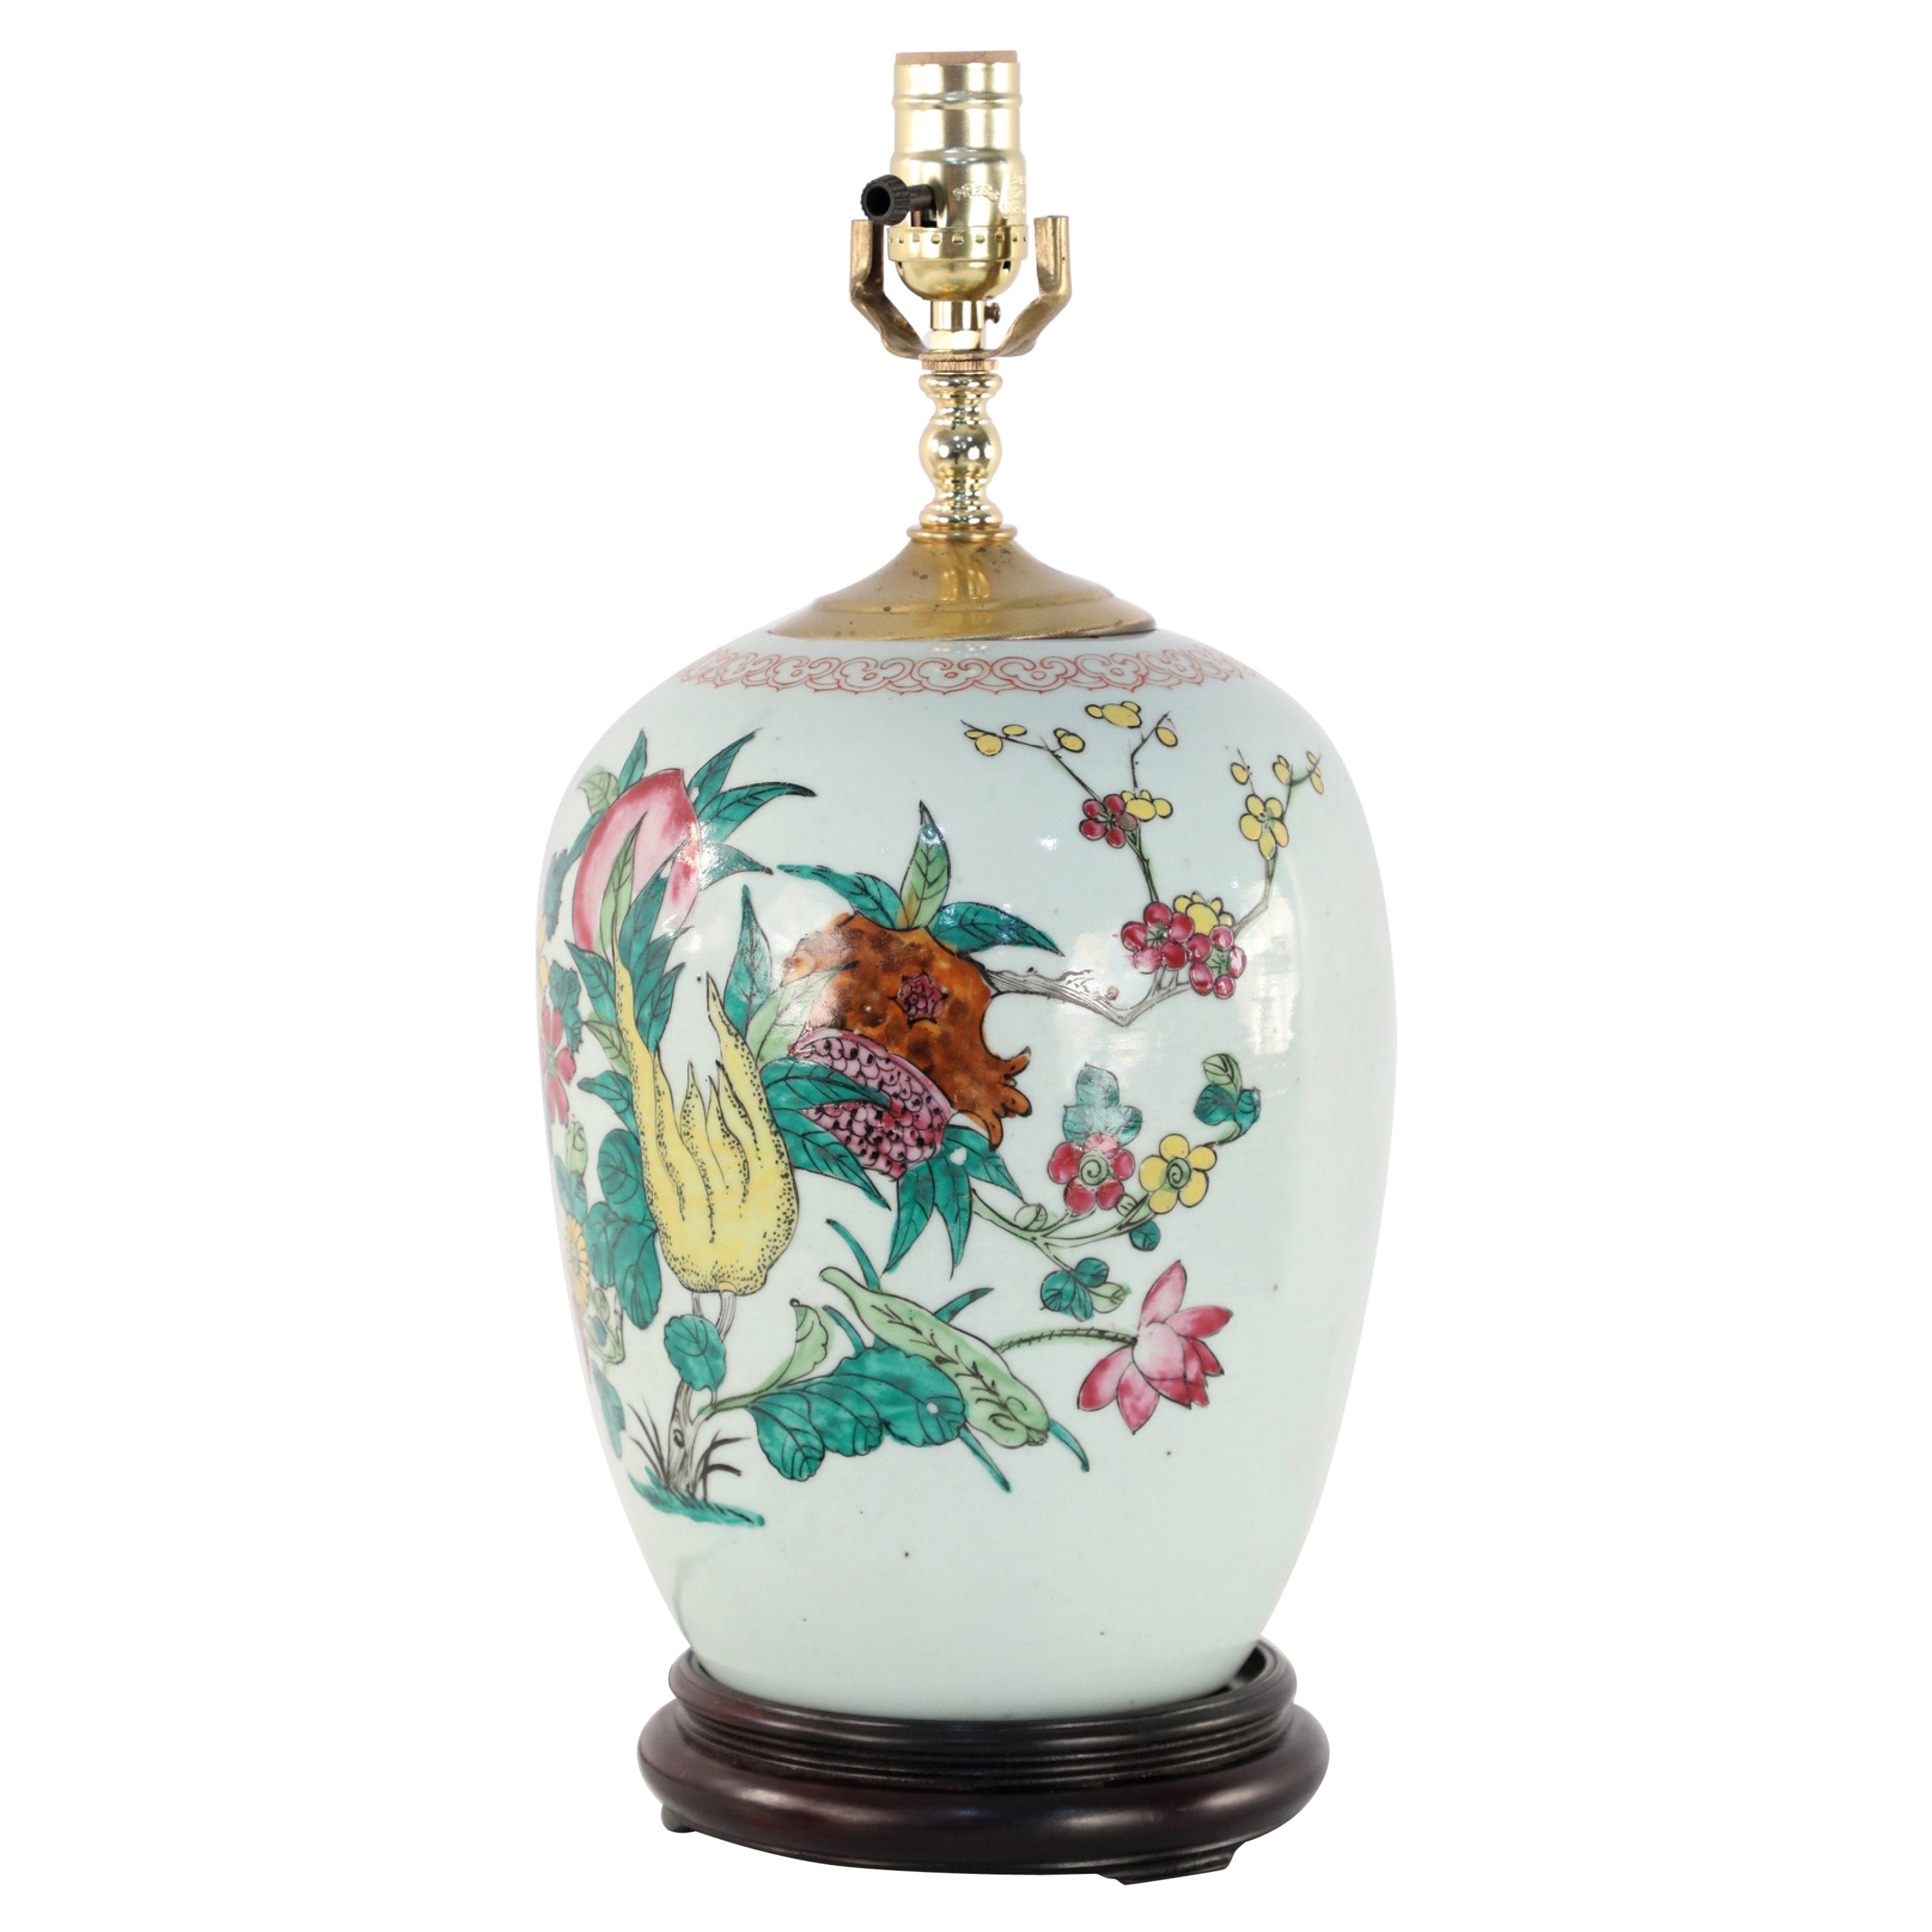 Chinese White Floral Patterned Porcelain Table Lamp